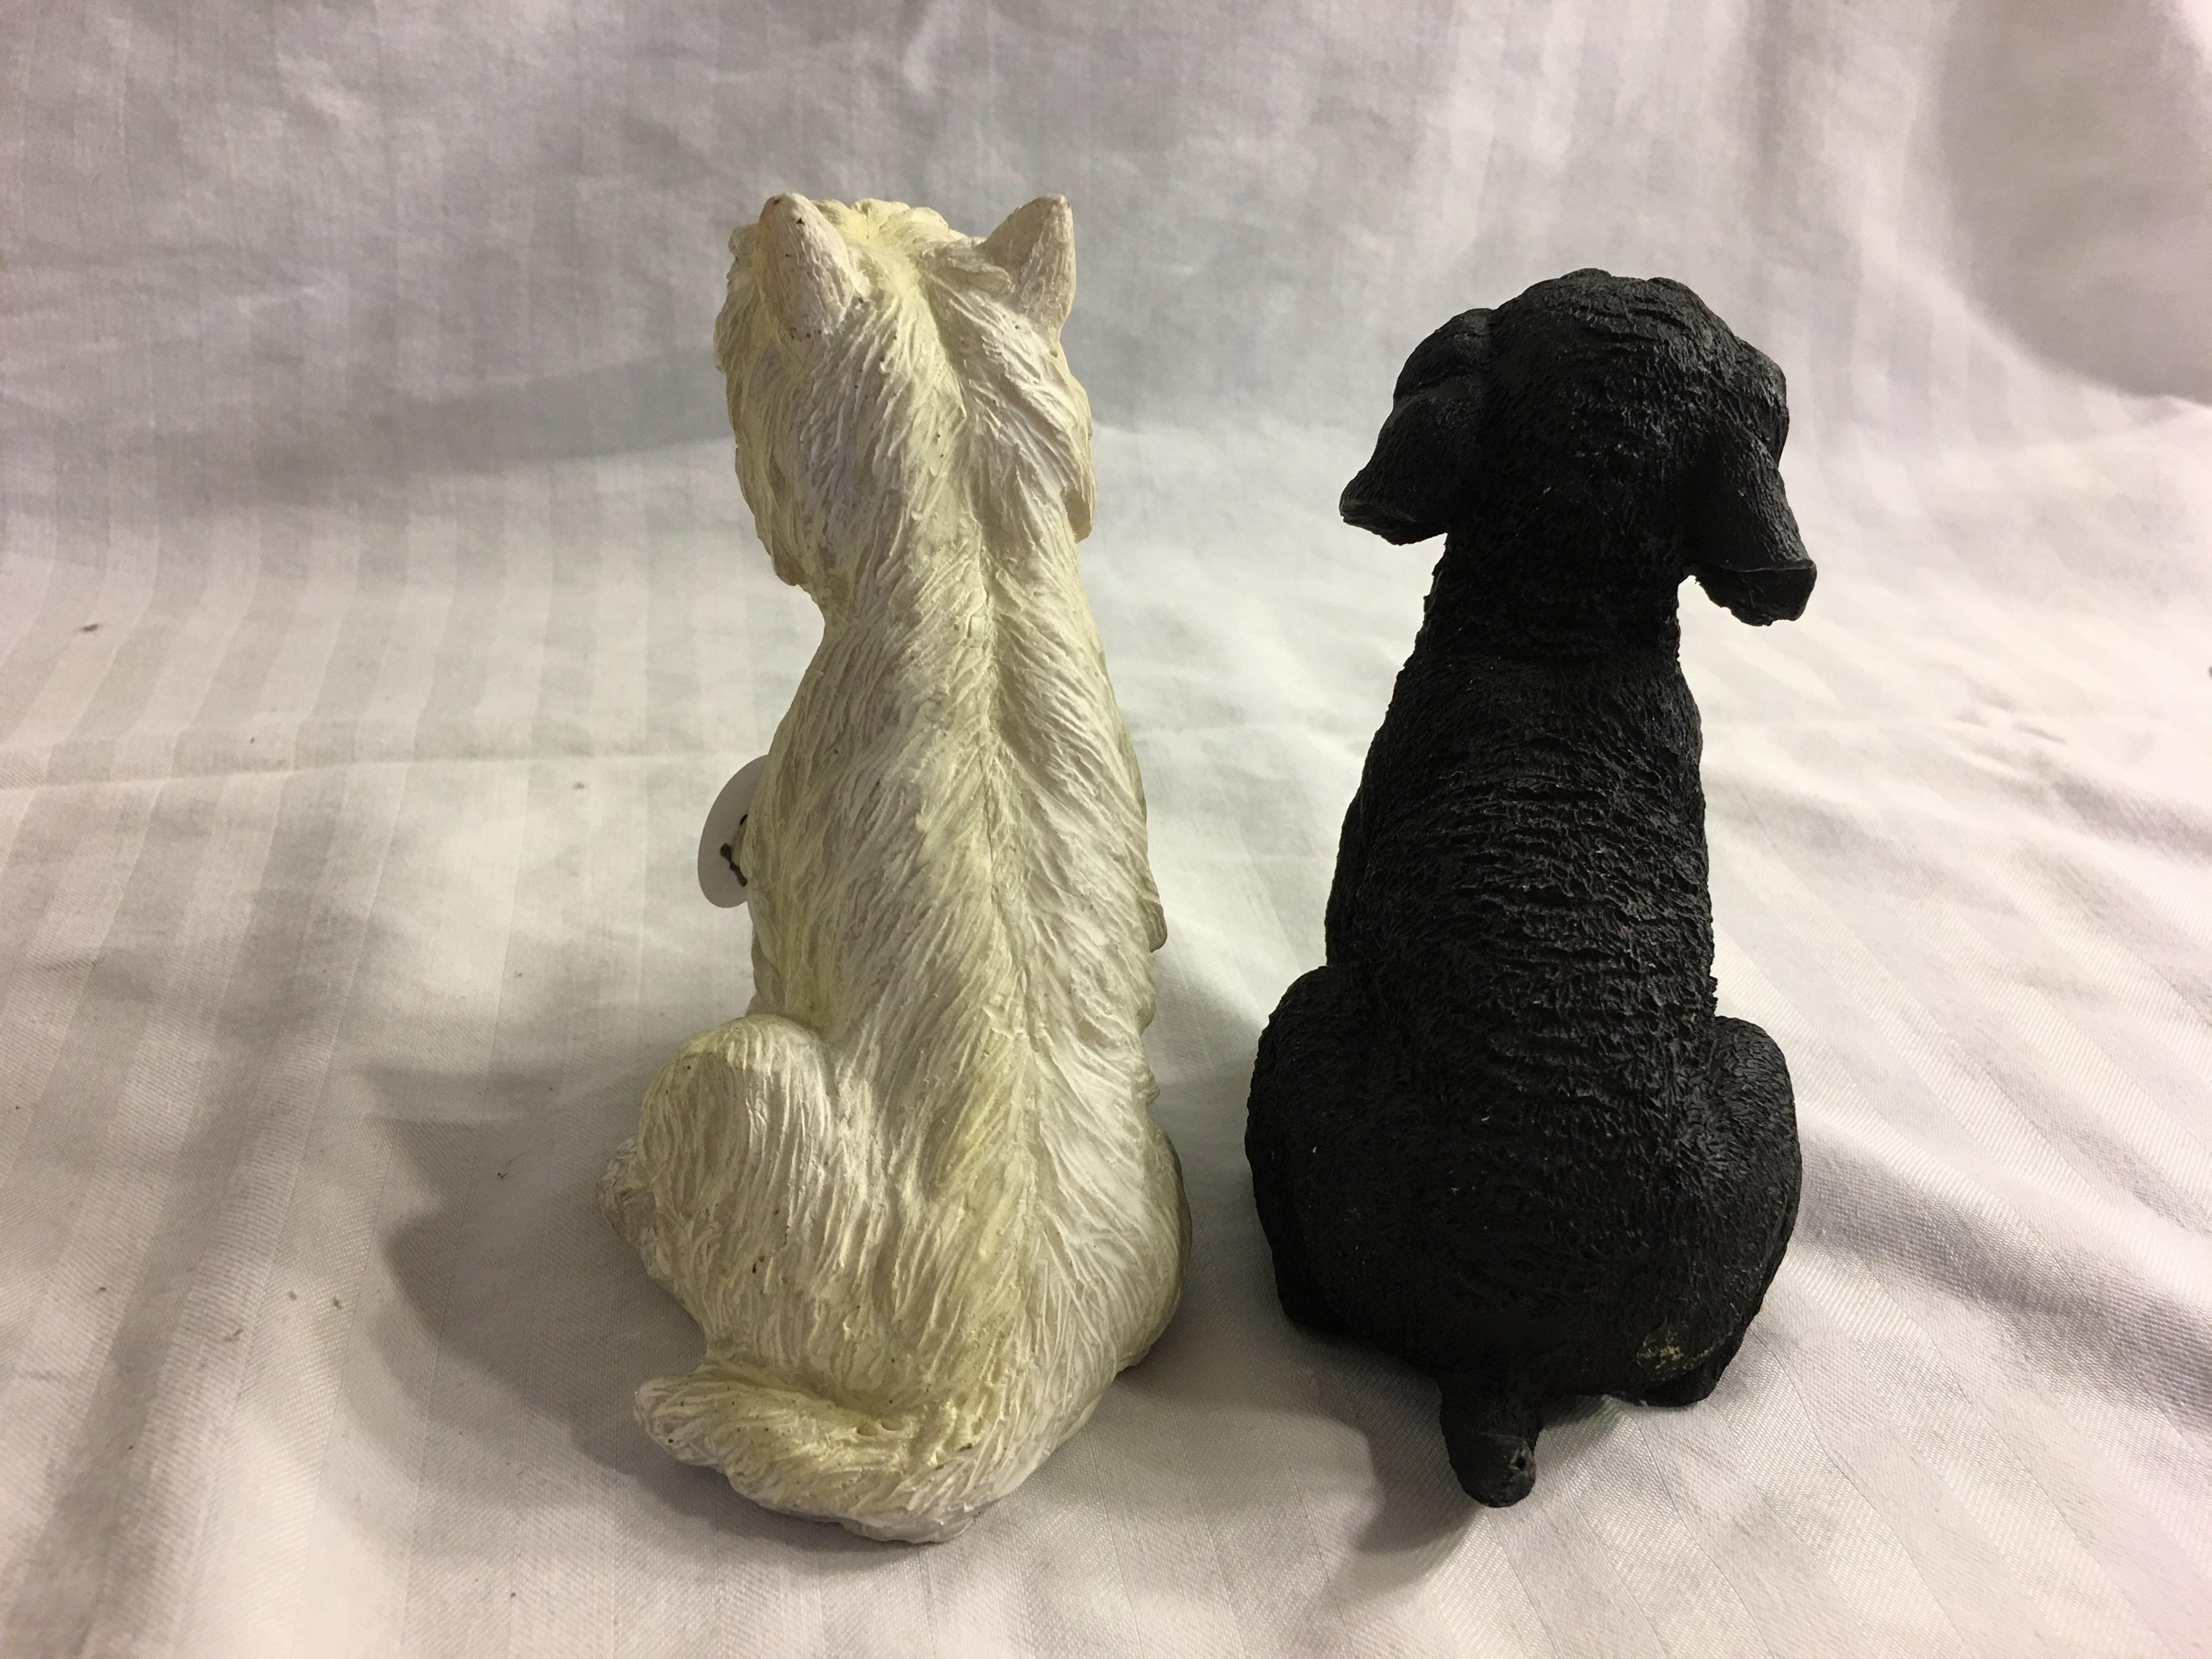 Lot of 2 Pieces Collector Ceramic Dog Figurines Size: 4-5"Tall/each - See Pictures